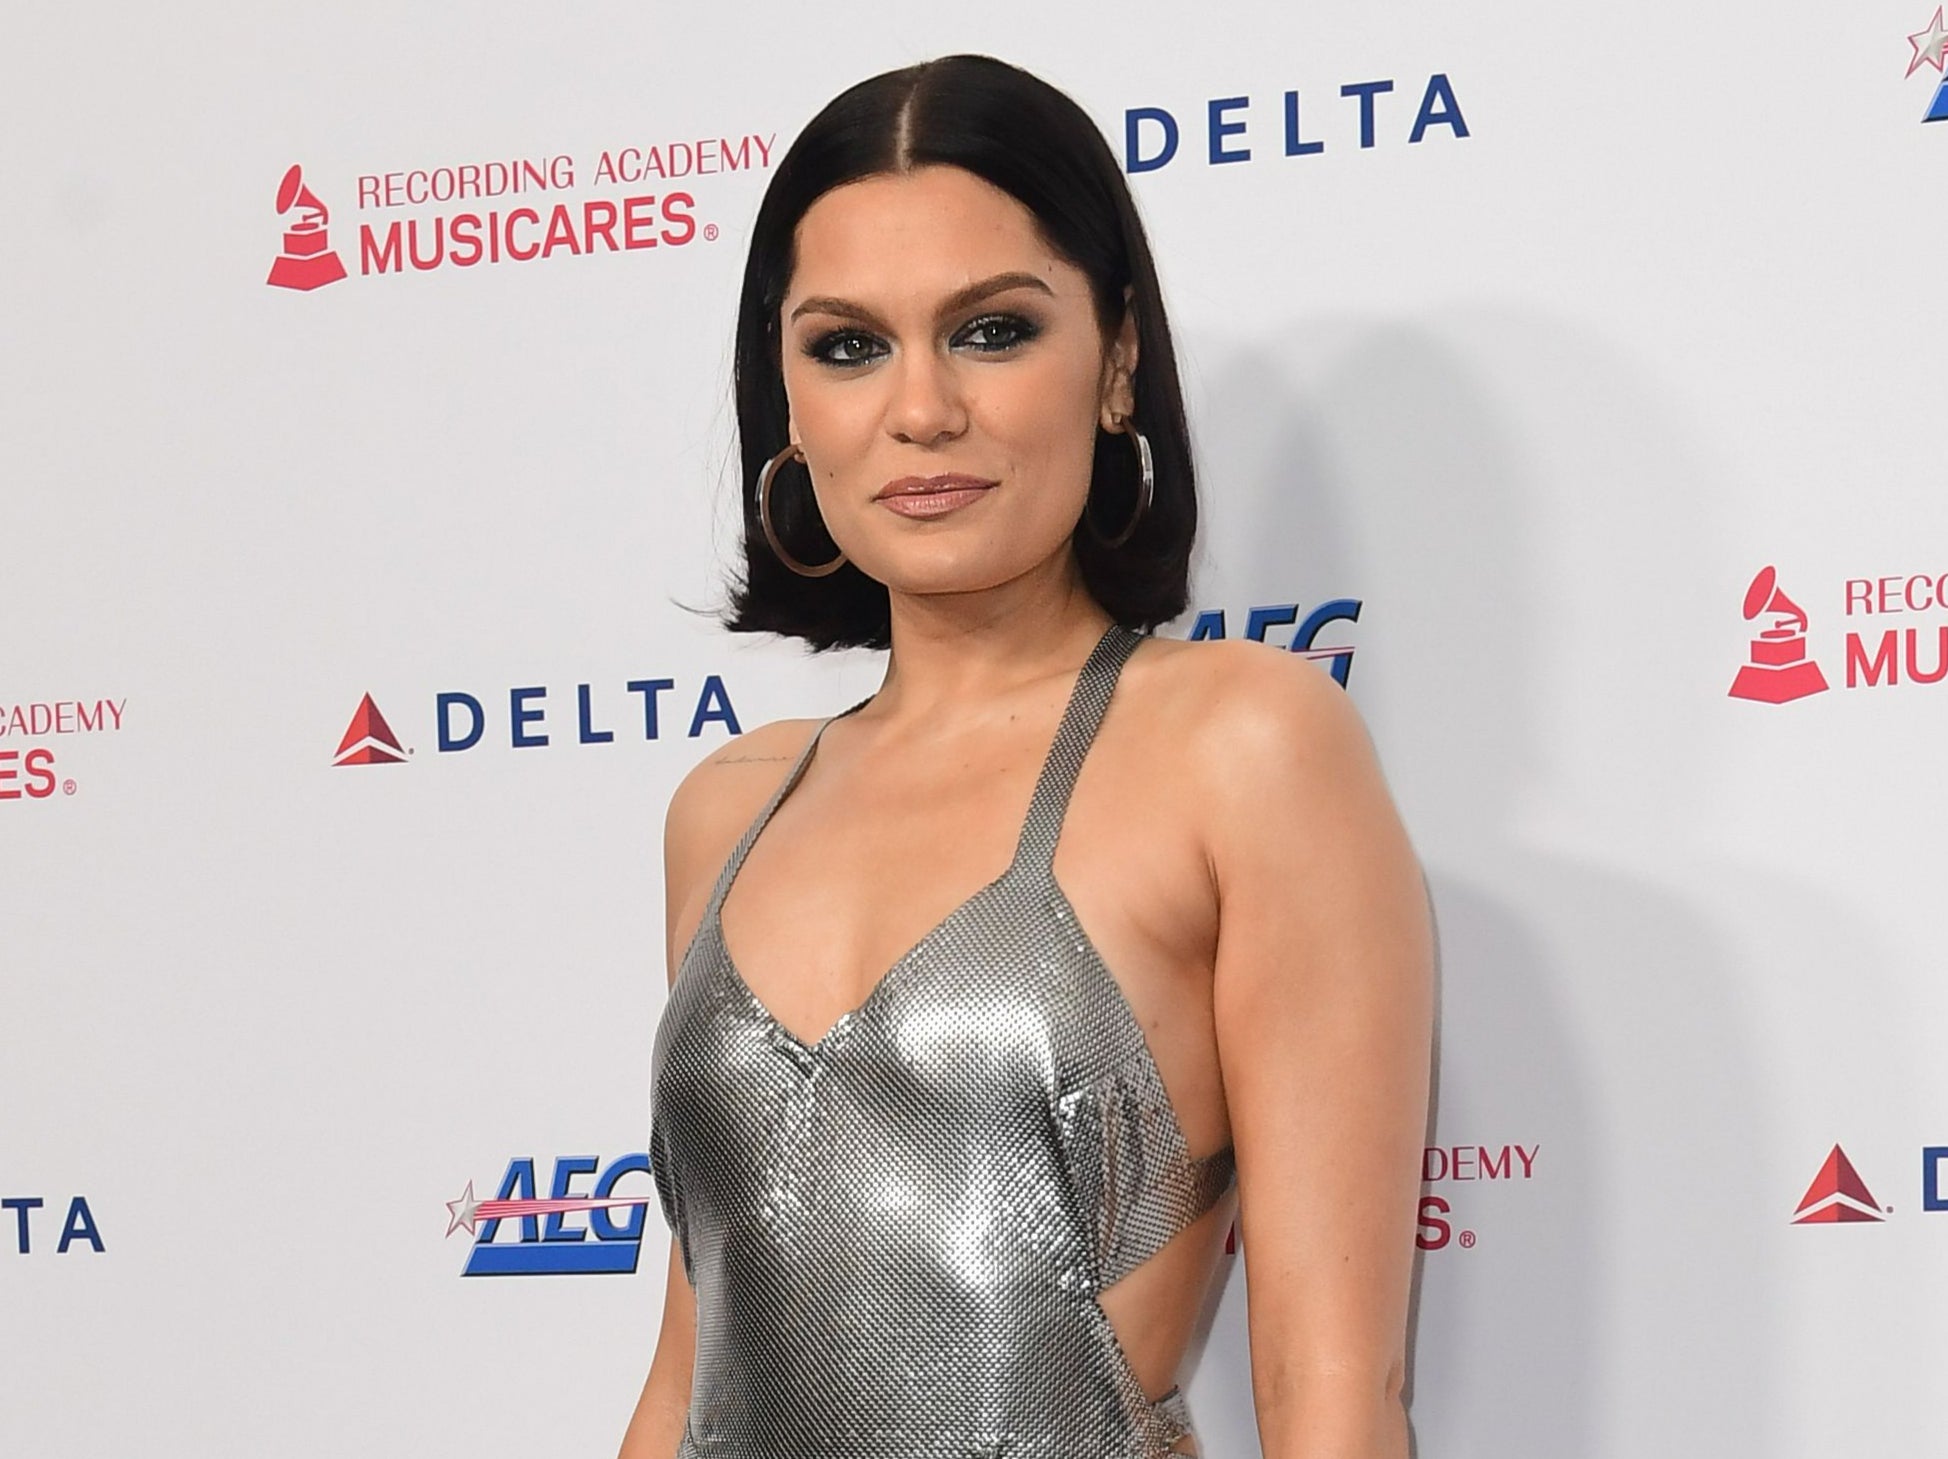 Jessie J said she ‘feels great’ about her weight and told people to refrain commenting on other people’s bodies